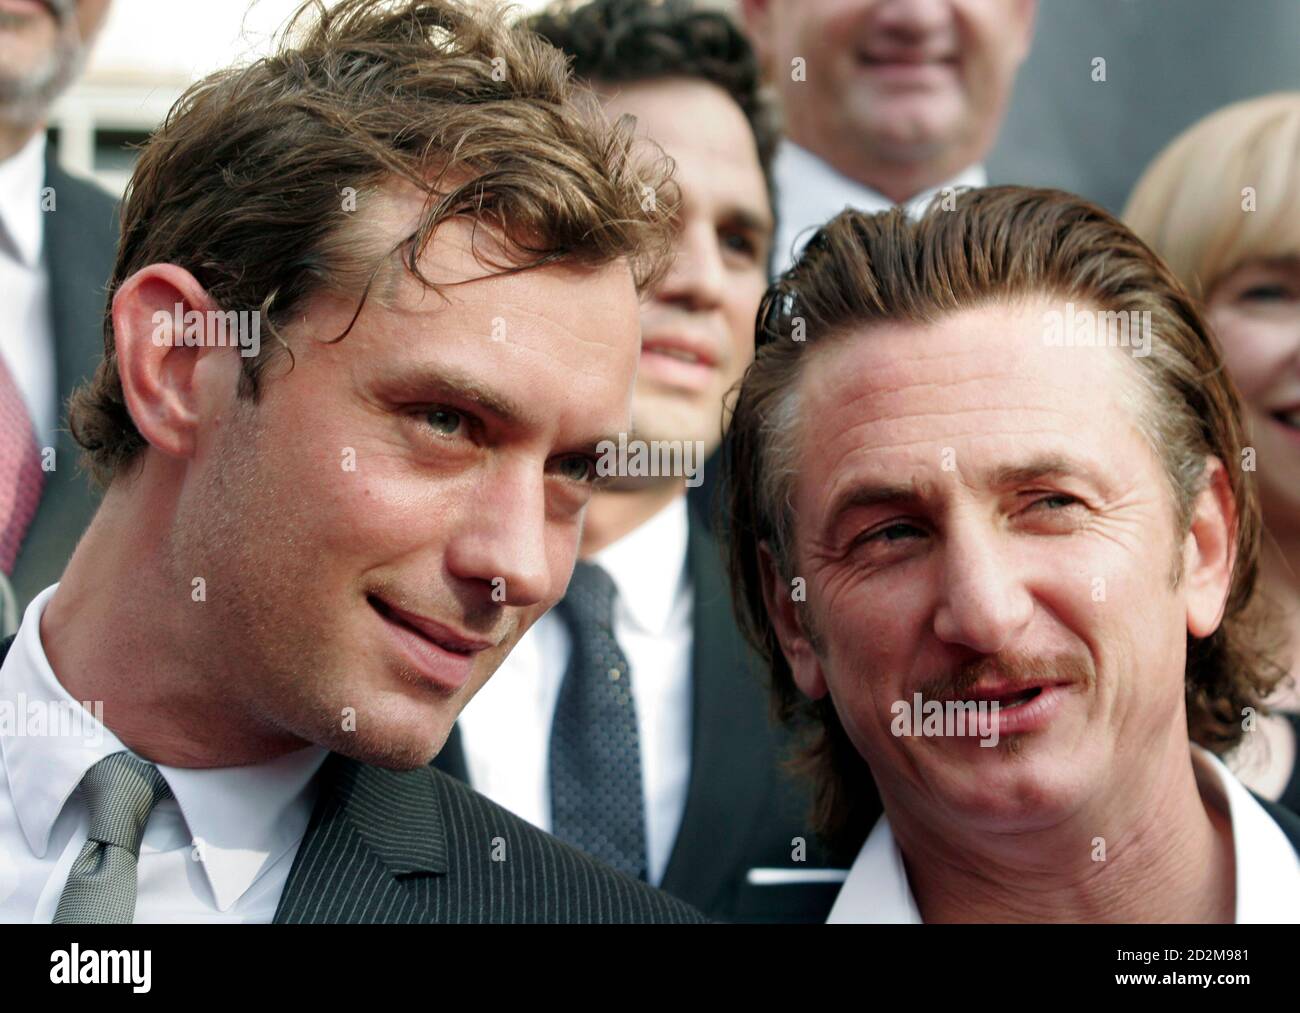 Cast members Jude Law (L) and Sean Penn talk as they pose for photos at the  premiere of "All the King's Men" in New Orleans, Louisiana September 16,  2006. REUTERS/Lee Celano (UNITED